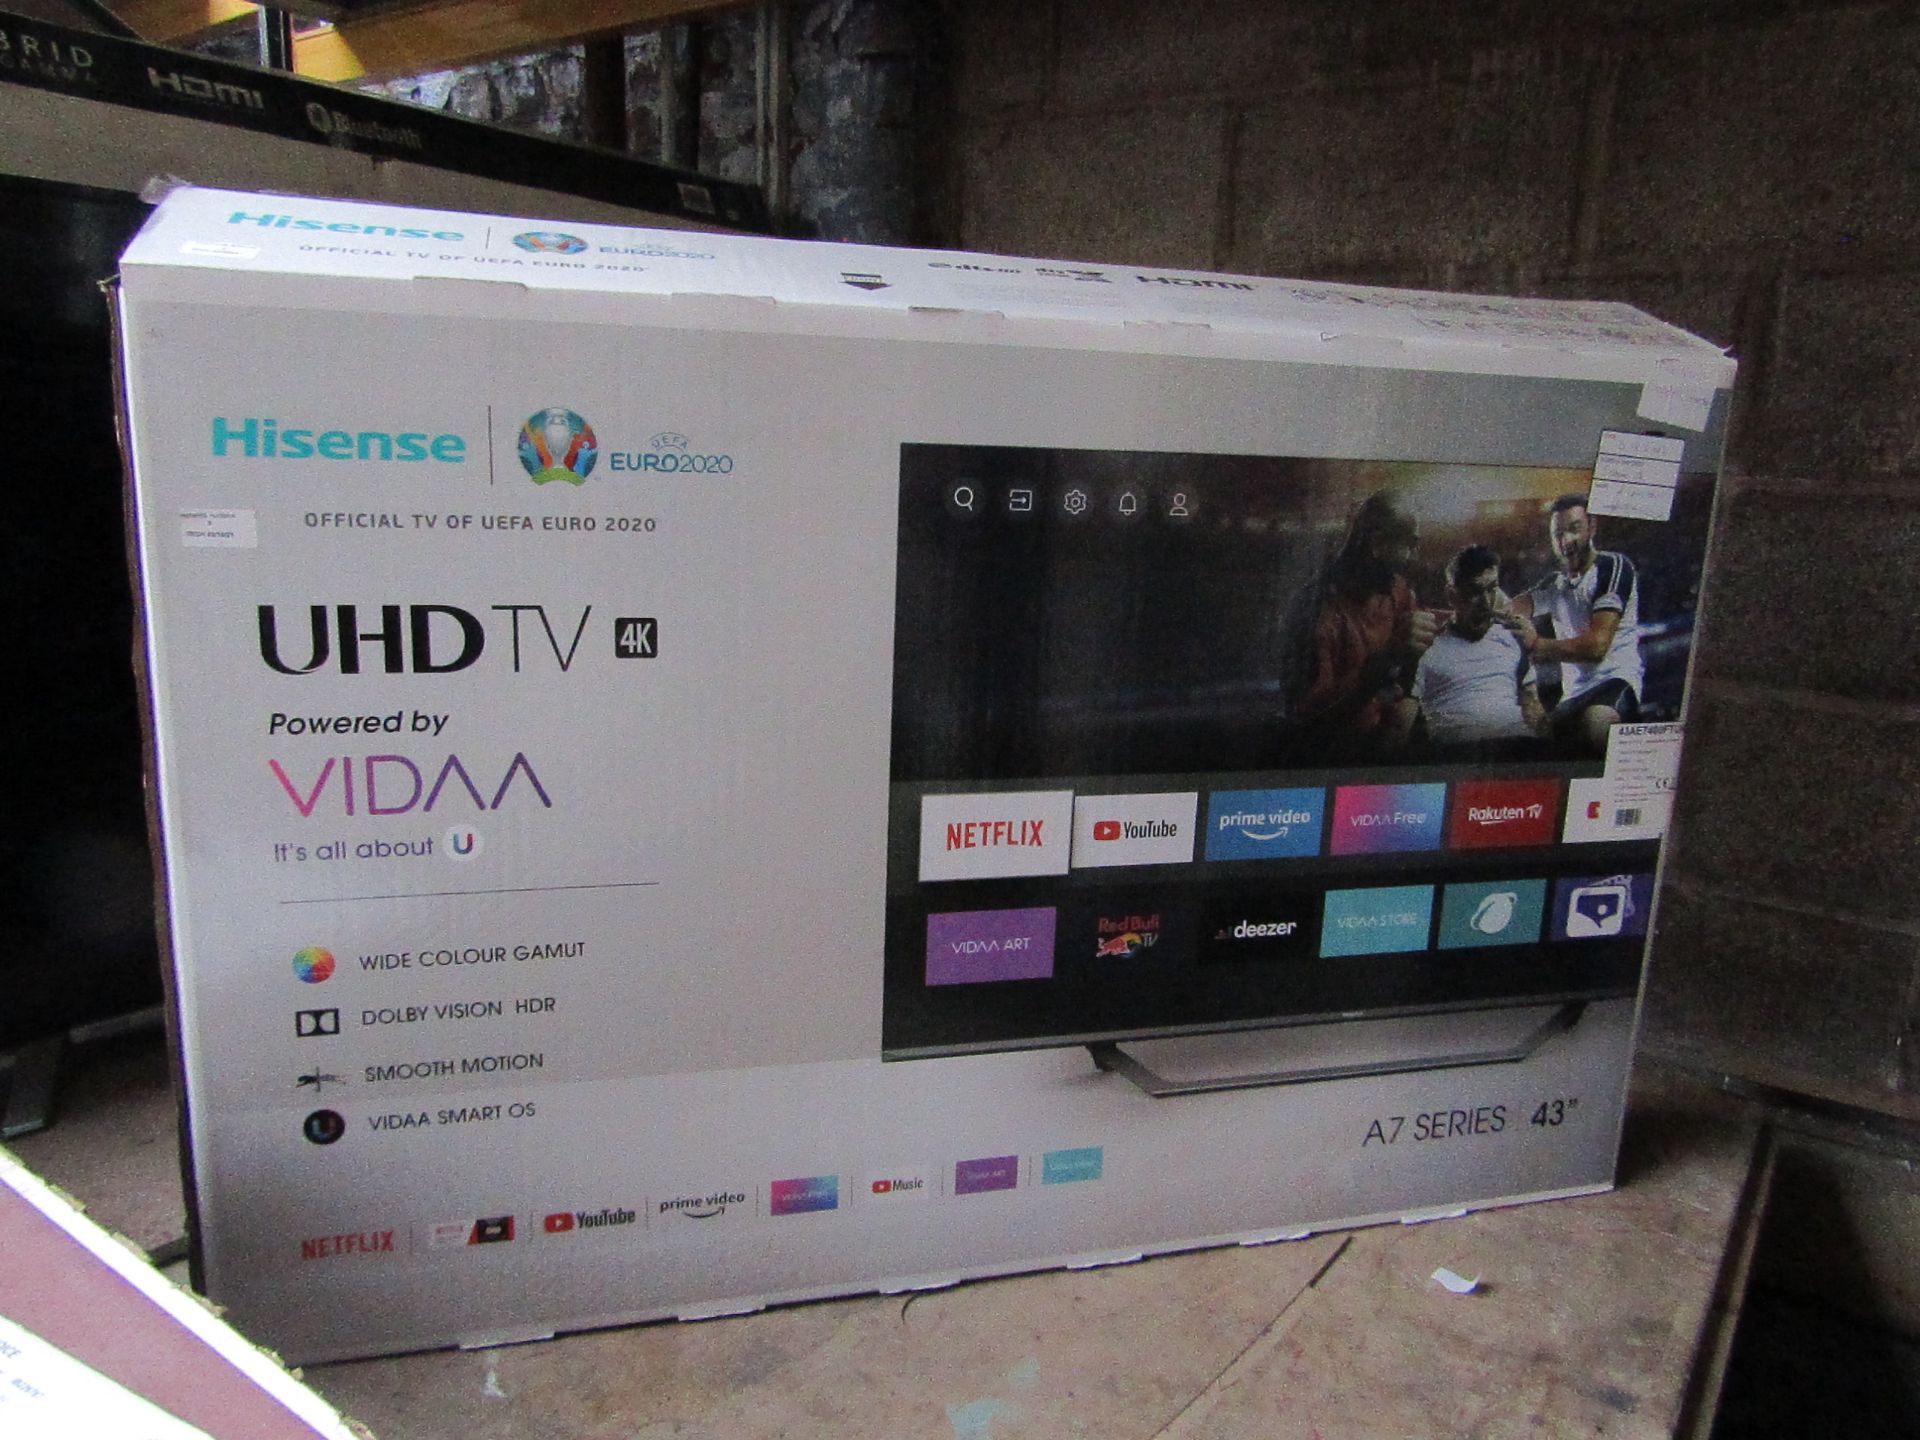 Hisense 43AE7400FTUK 43" 4K UHD TV, Tested working for picture via HDMI Feed, comes with original